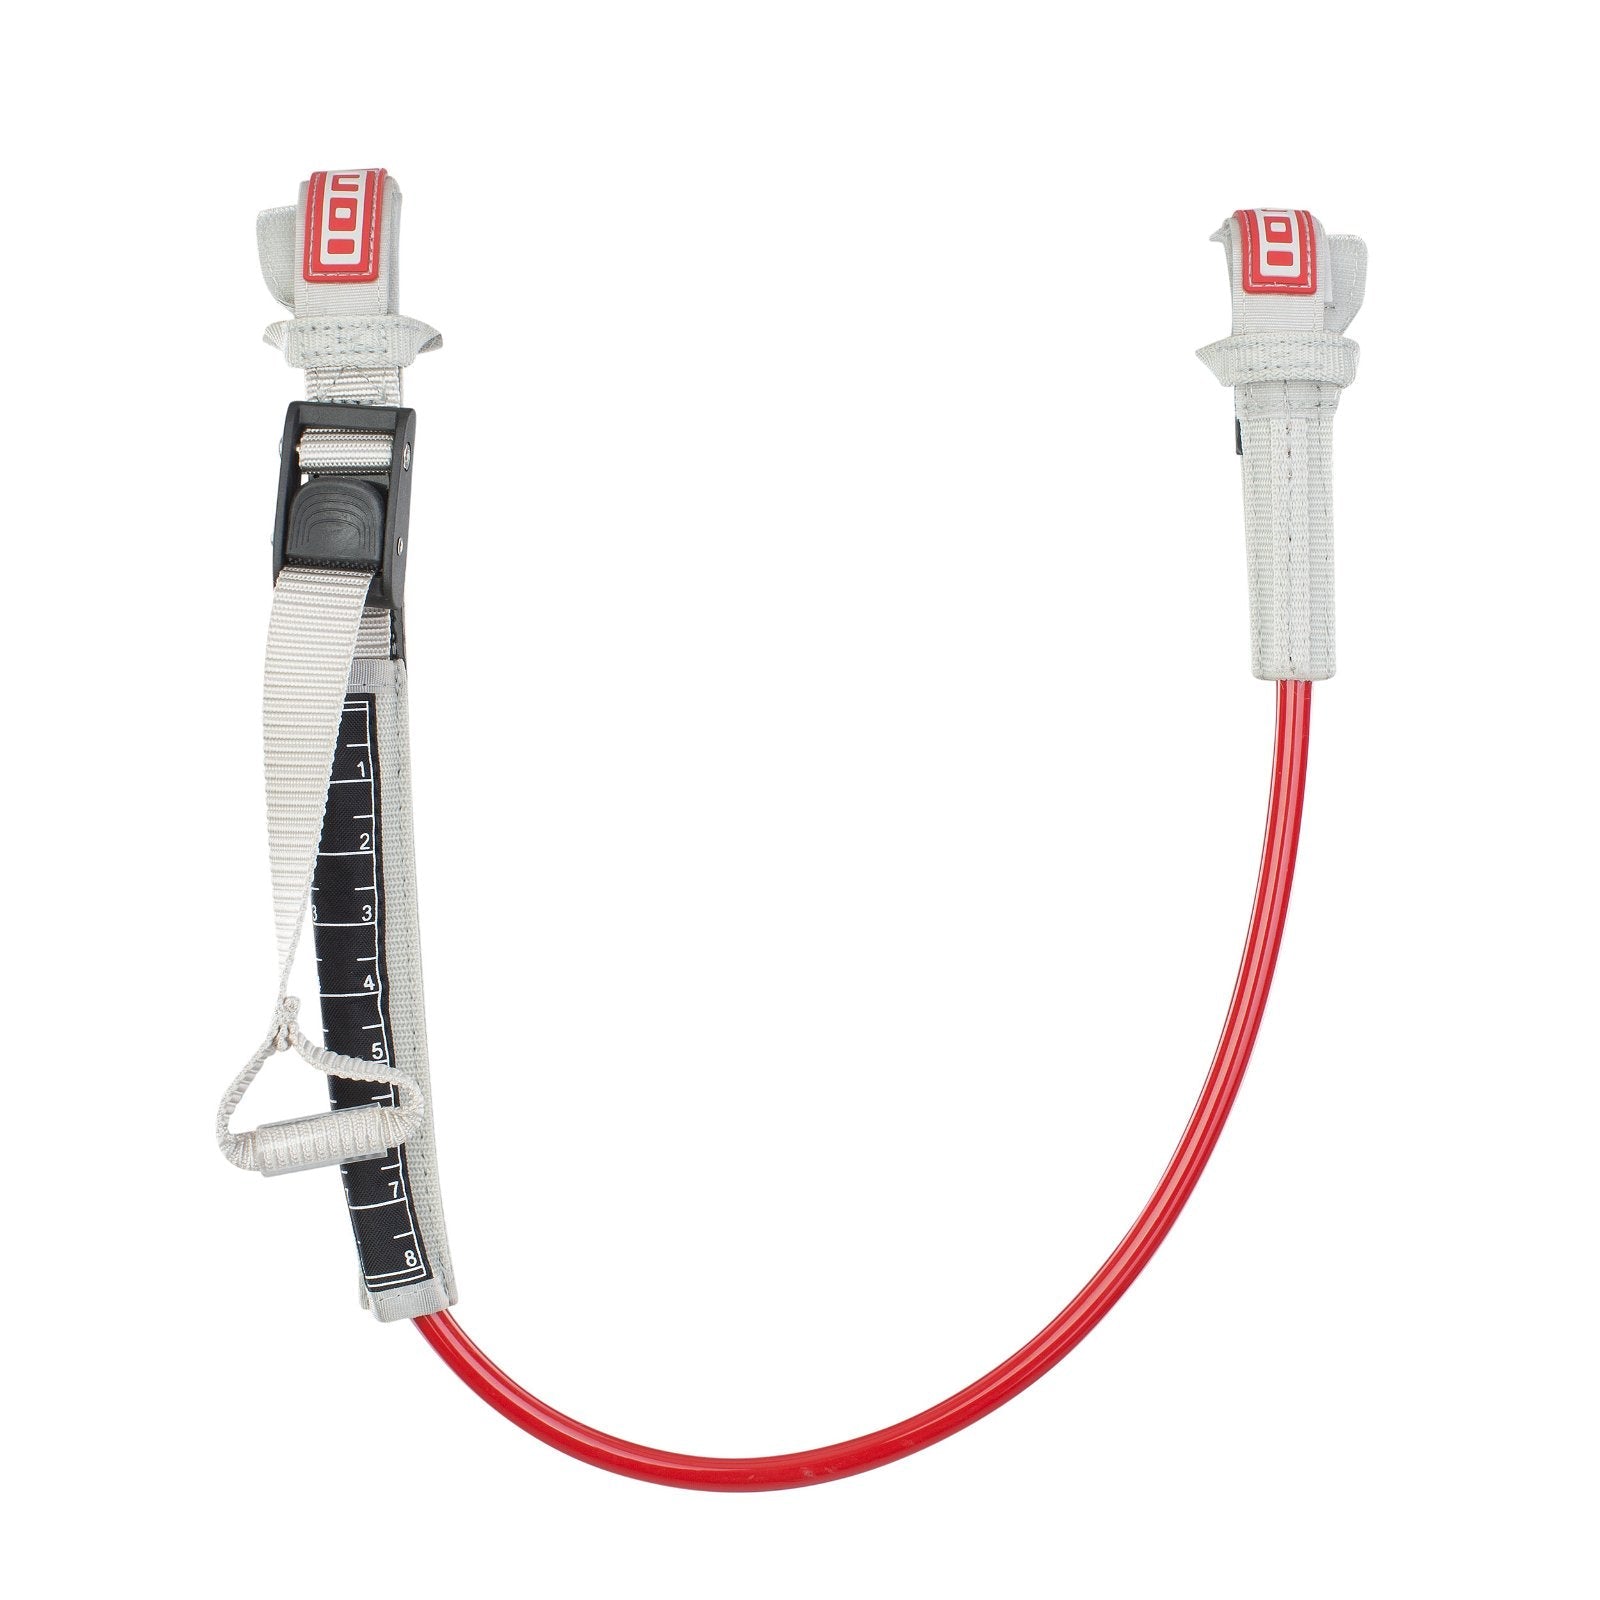 ION Windsurf Harness Line Vario 2024-ION Water-22'-28'-red-48210-7075-9008415960828-Surf-store.com